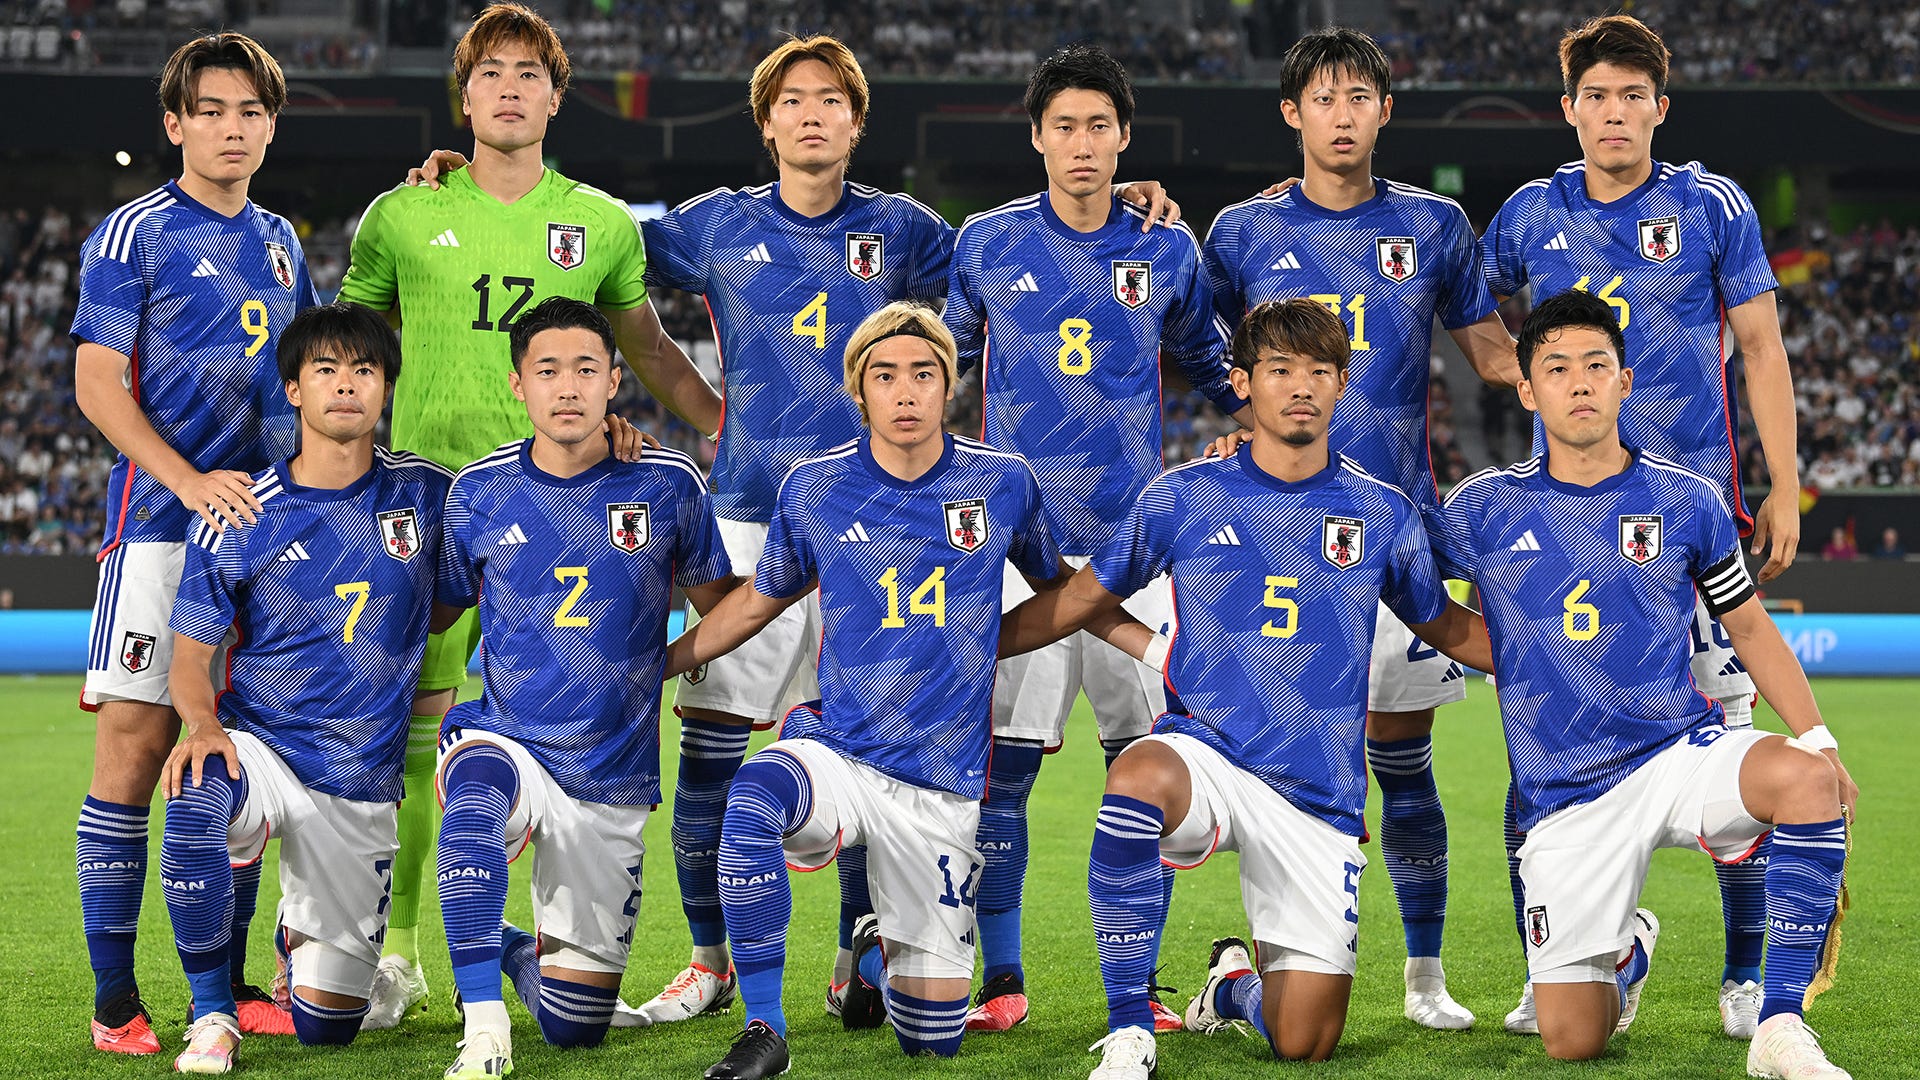 Japan Rises to 19th Place in Latest FIFA Rankings, Maintaining Highest Ranking in Asia